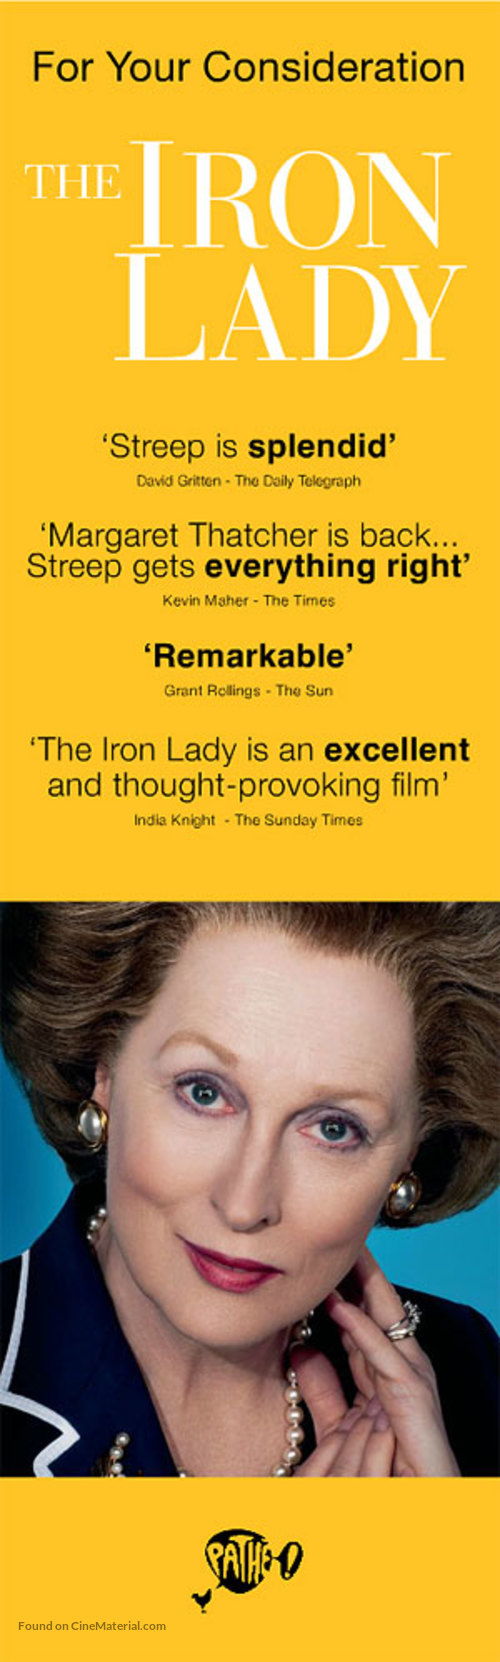 The Iron Lady - For your consideration movie poster